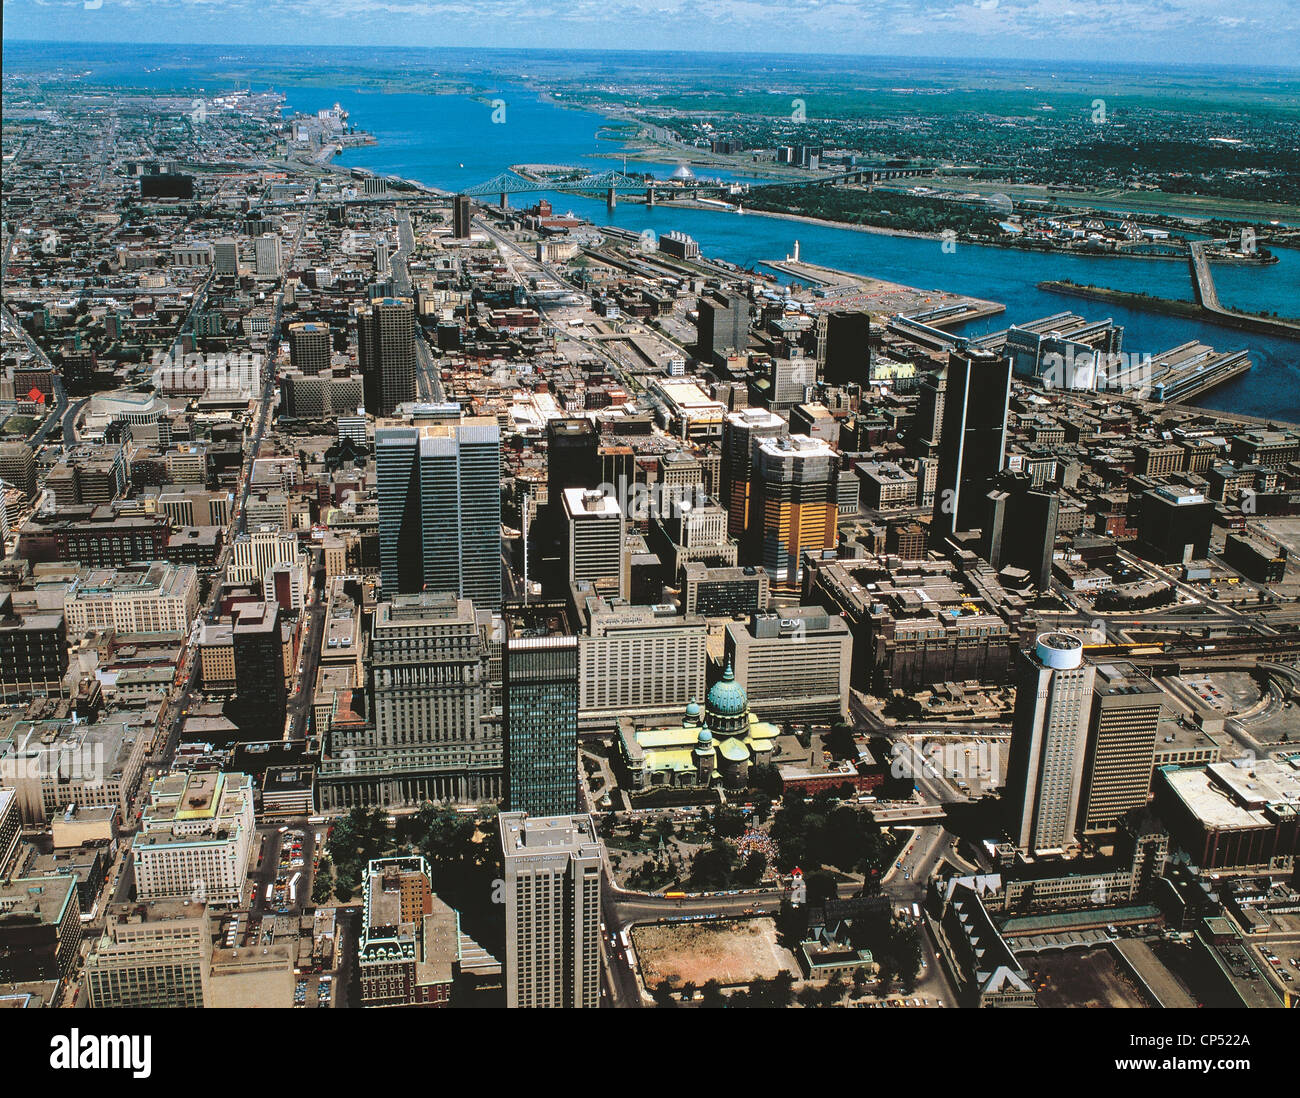 Canada - Quebec - Montreal. The city center and the Saint Lawrence River. Aerial view. Stock Photo